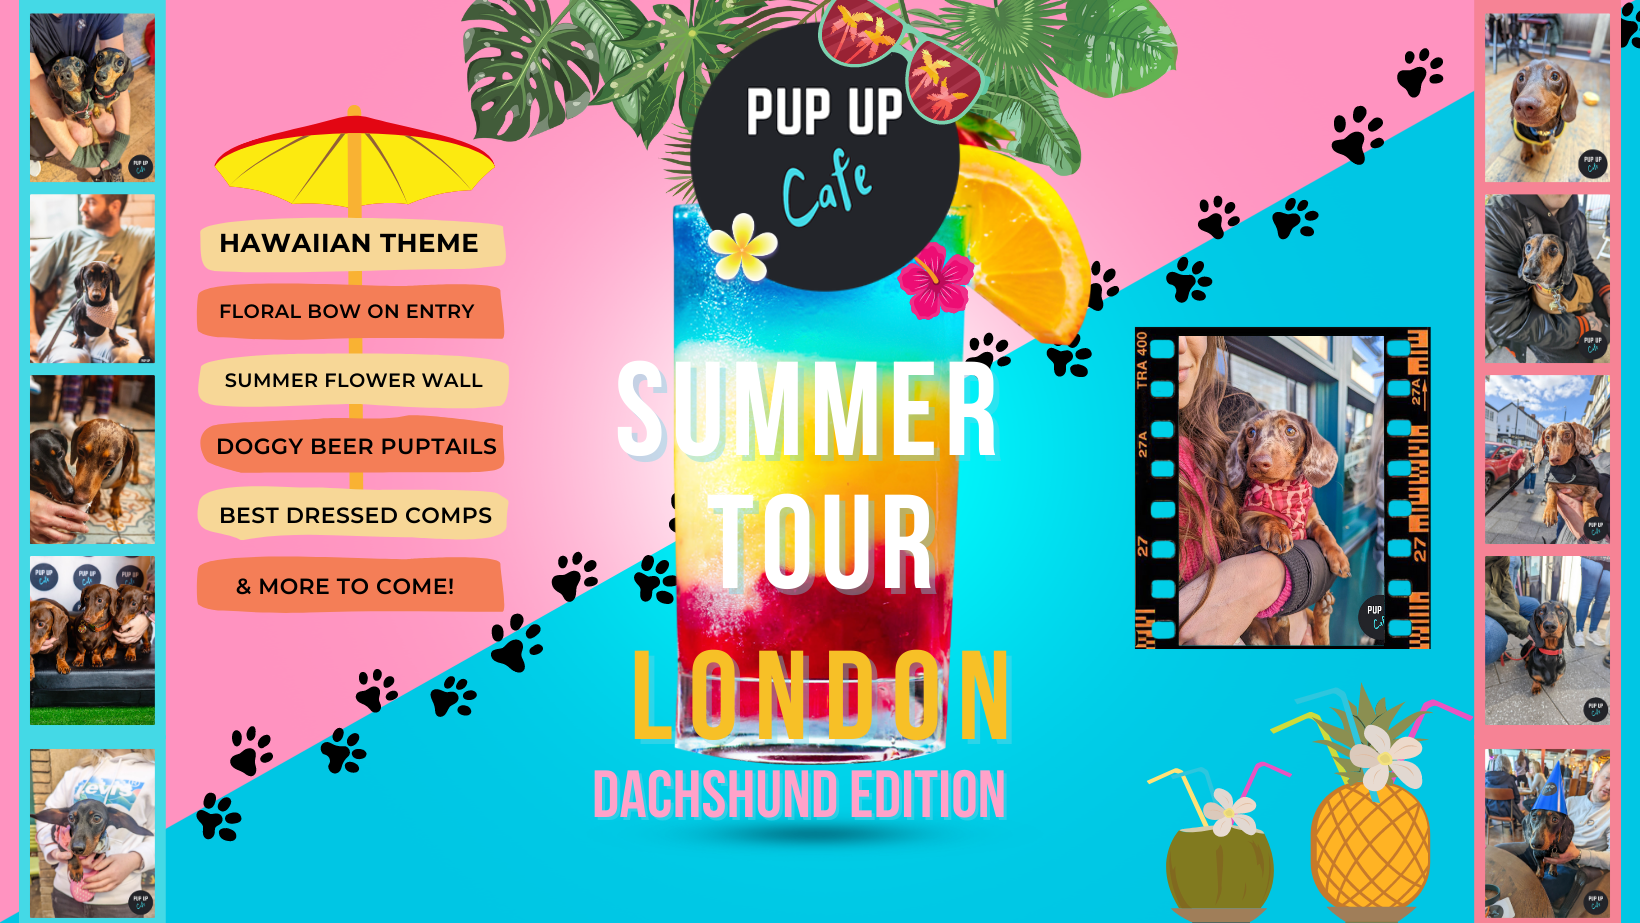 Dachshund Pup Up Cafe – London | SUMMER TOUR! 🌞